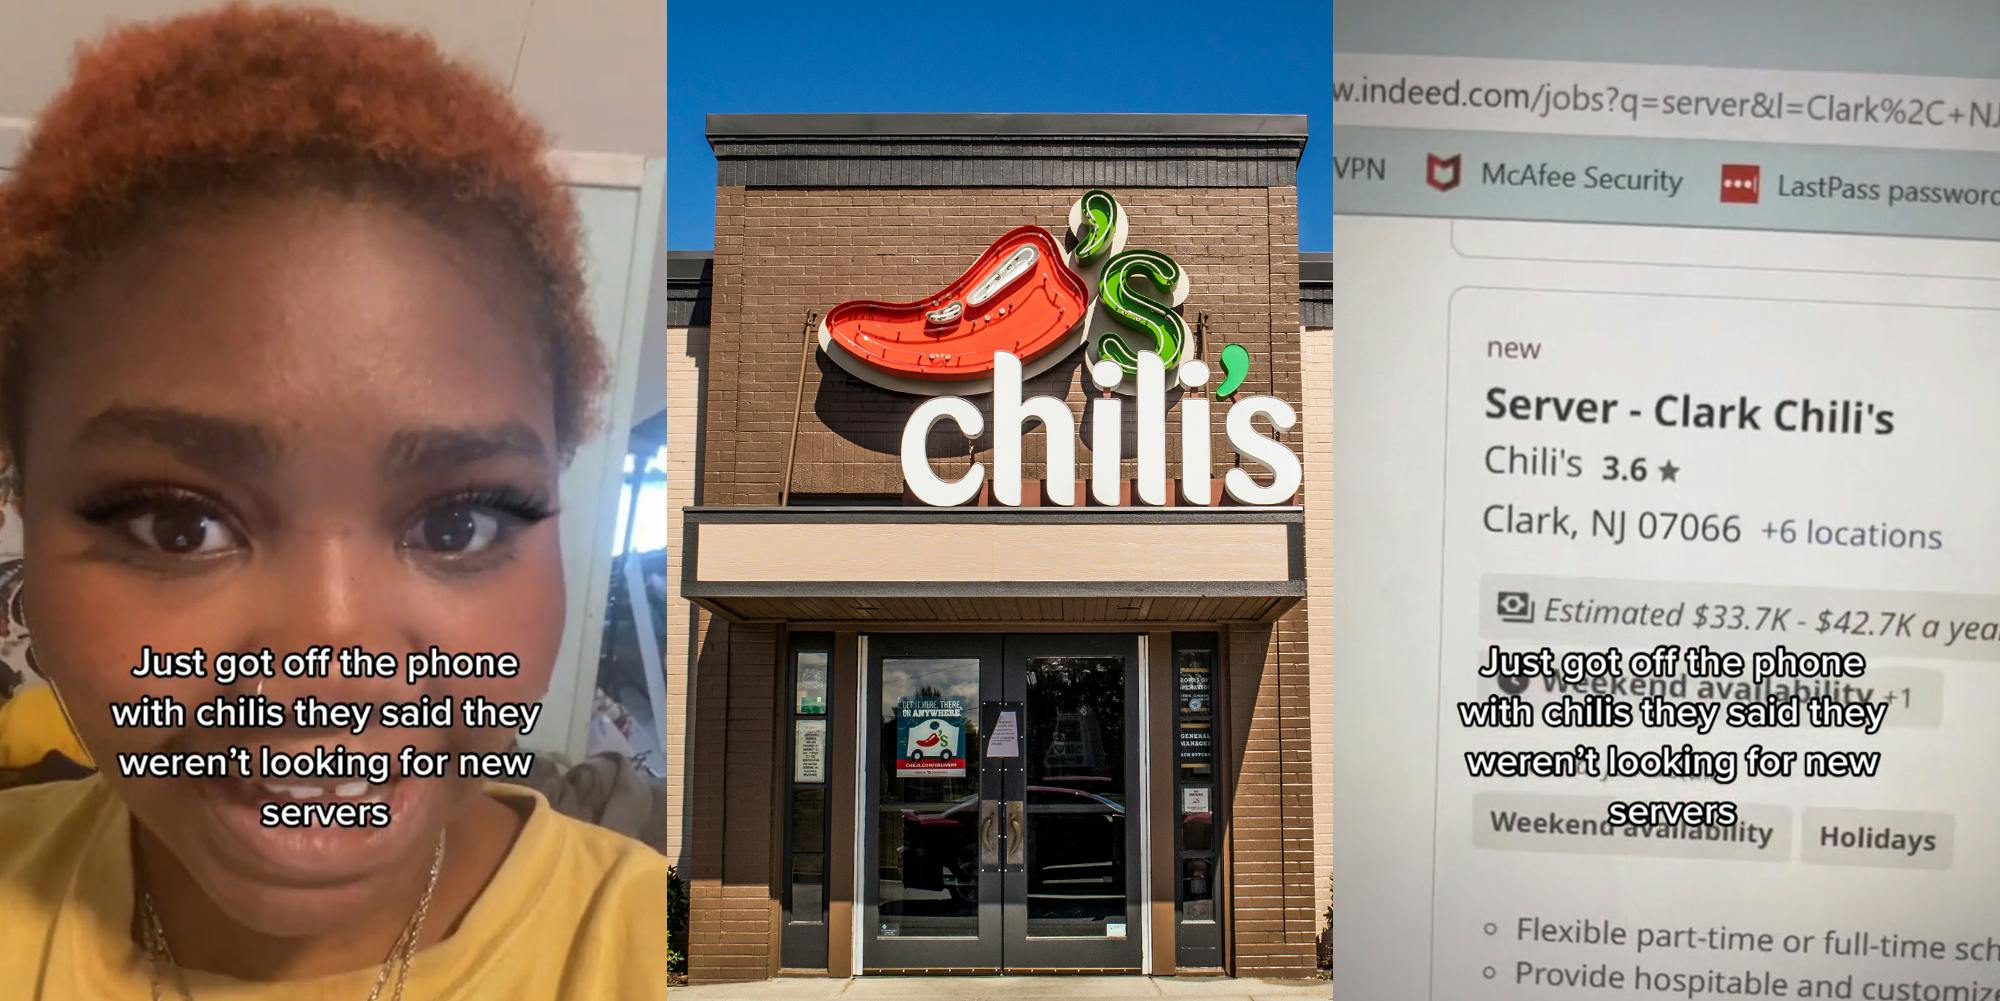 woman with caption "Just got off the phone with chilis they said they weren't looking for new servers" (l) Chili's restaurant front with sign (c) computer screen with indeed job search showing "Server - Clark Chili's" with caption "Just got off the phone with chilis they said they weren't looking for new servers" (r)